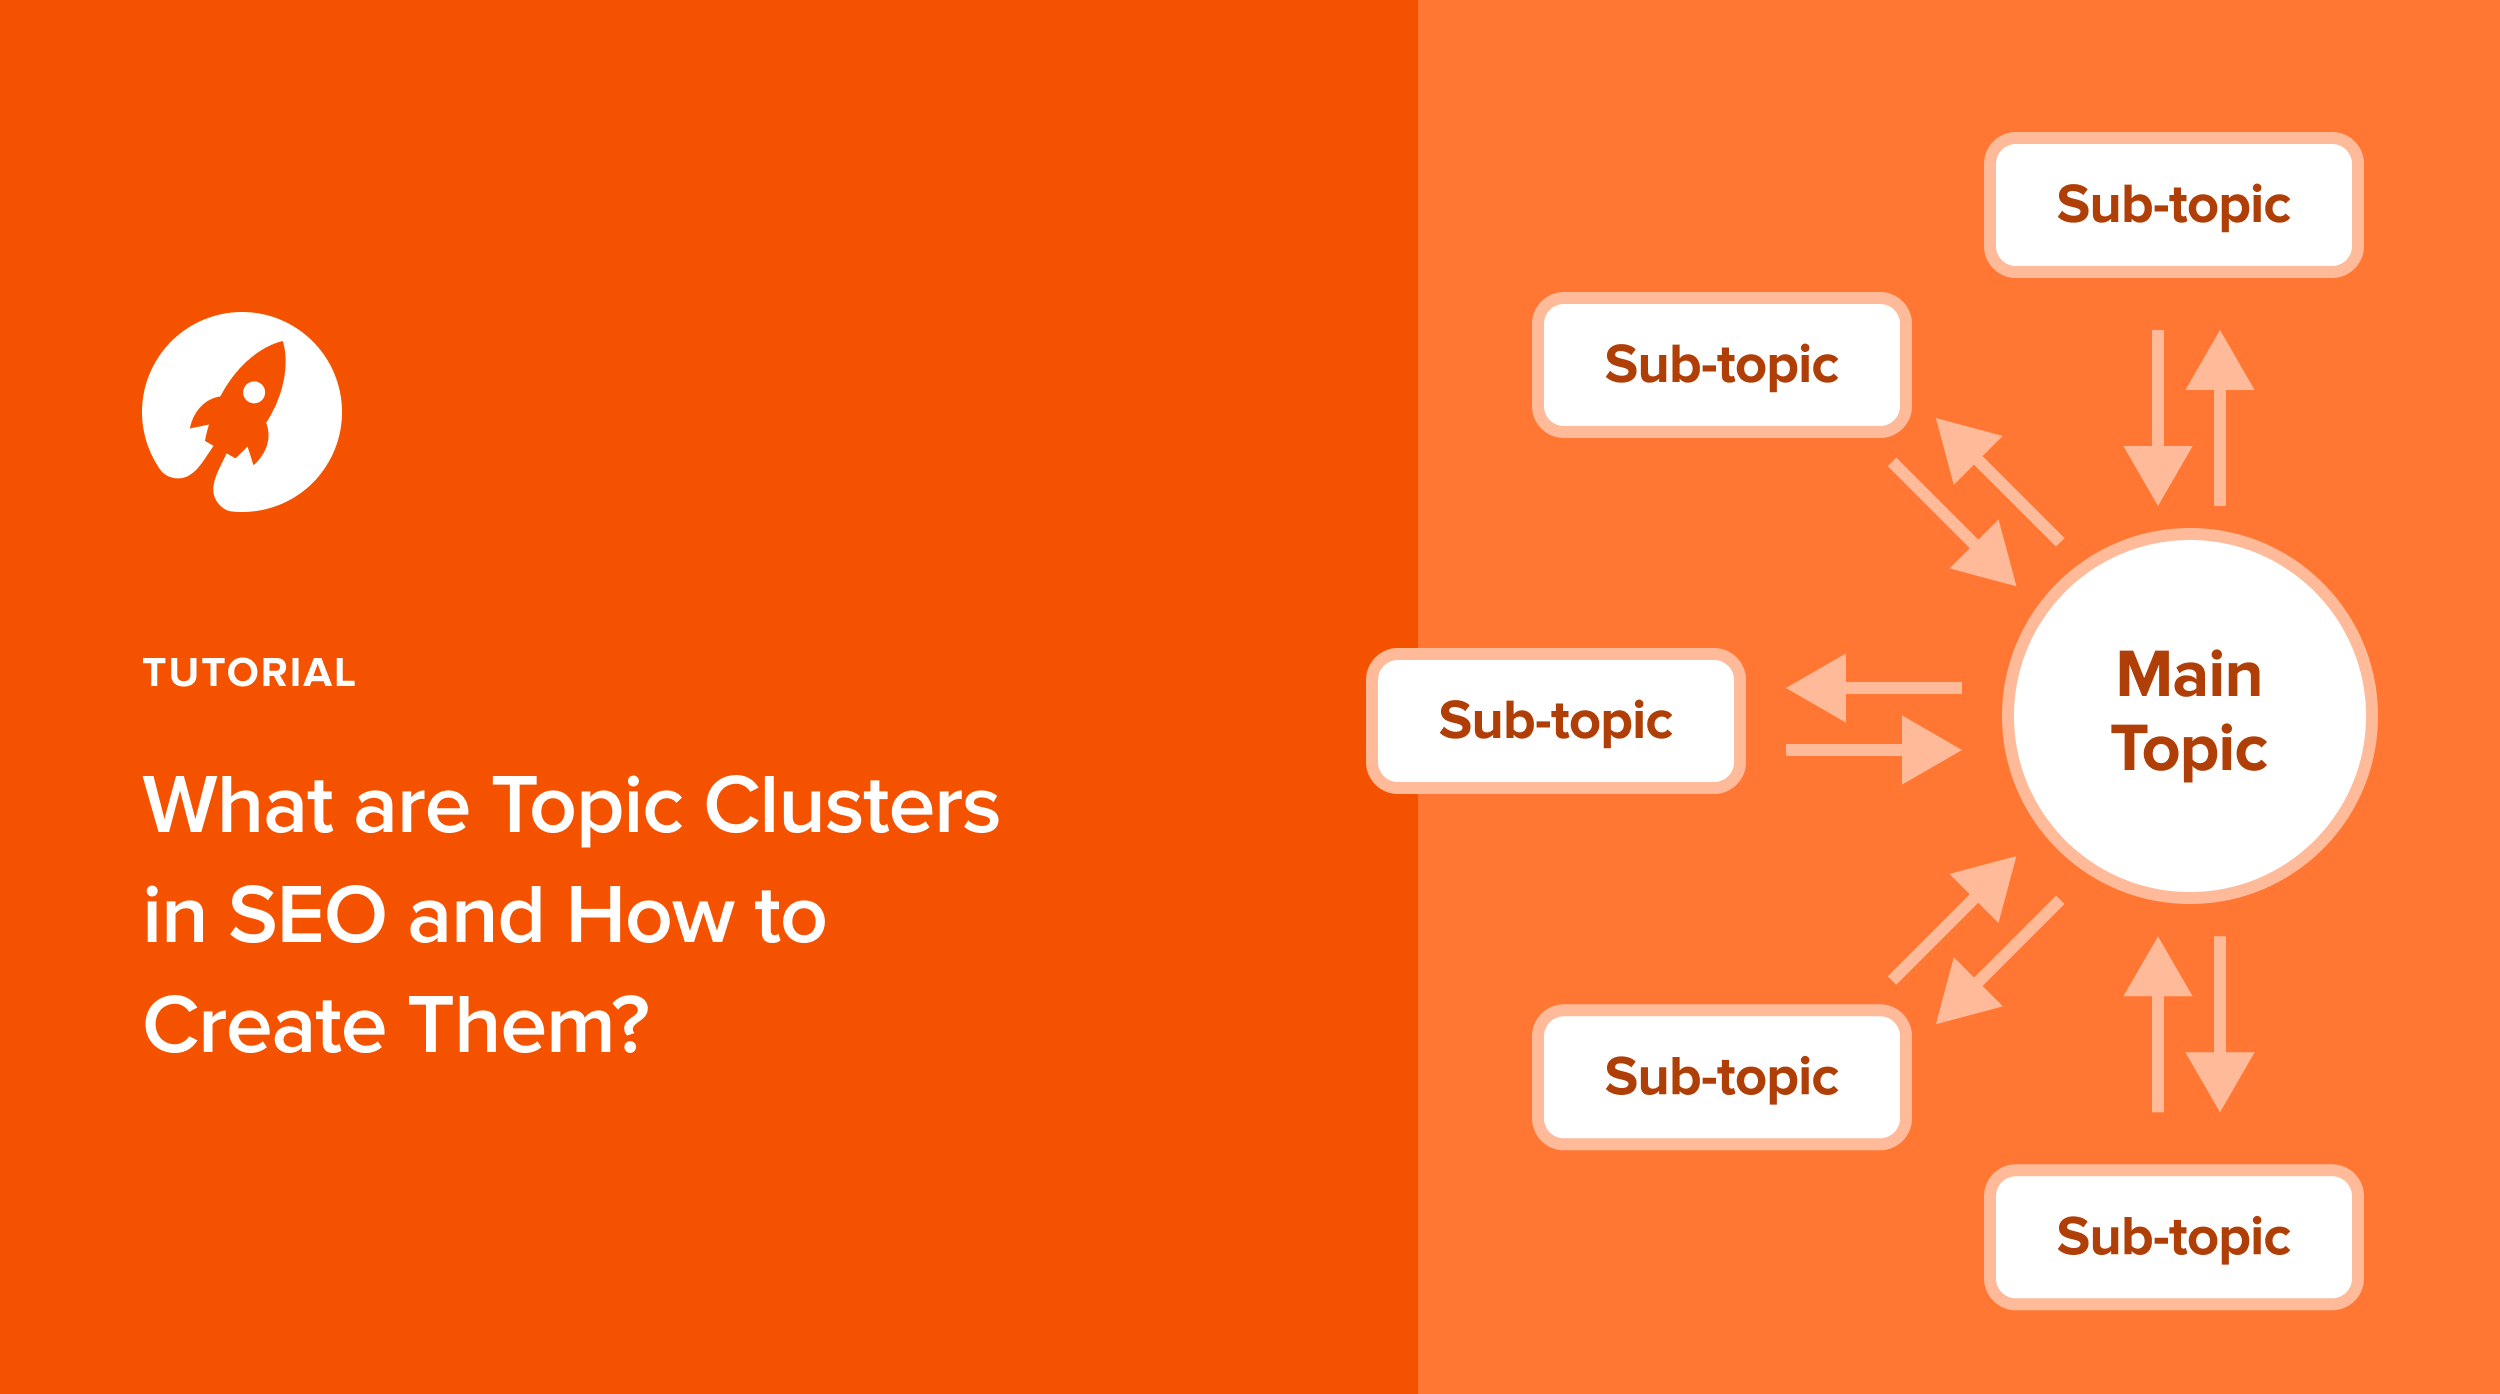 What are Topic Clusters in SEO and How to Create Them?